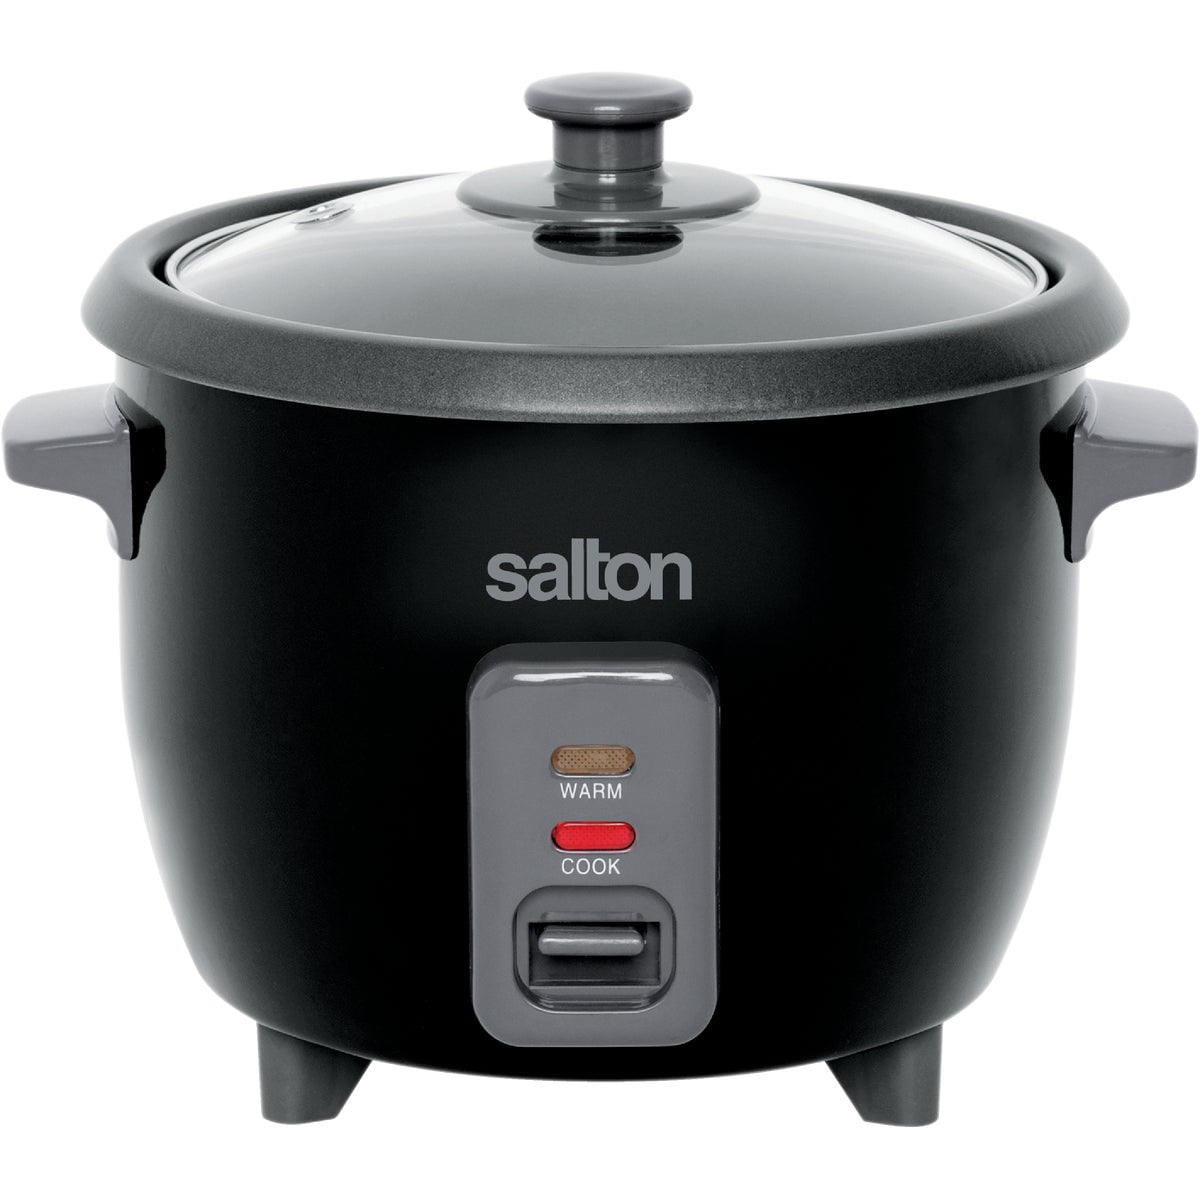 Oster 6-Cup Rice Cooker with Steam Tray, Black (CKSTRCMS65